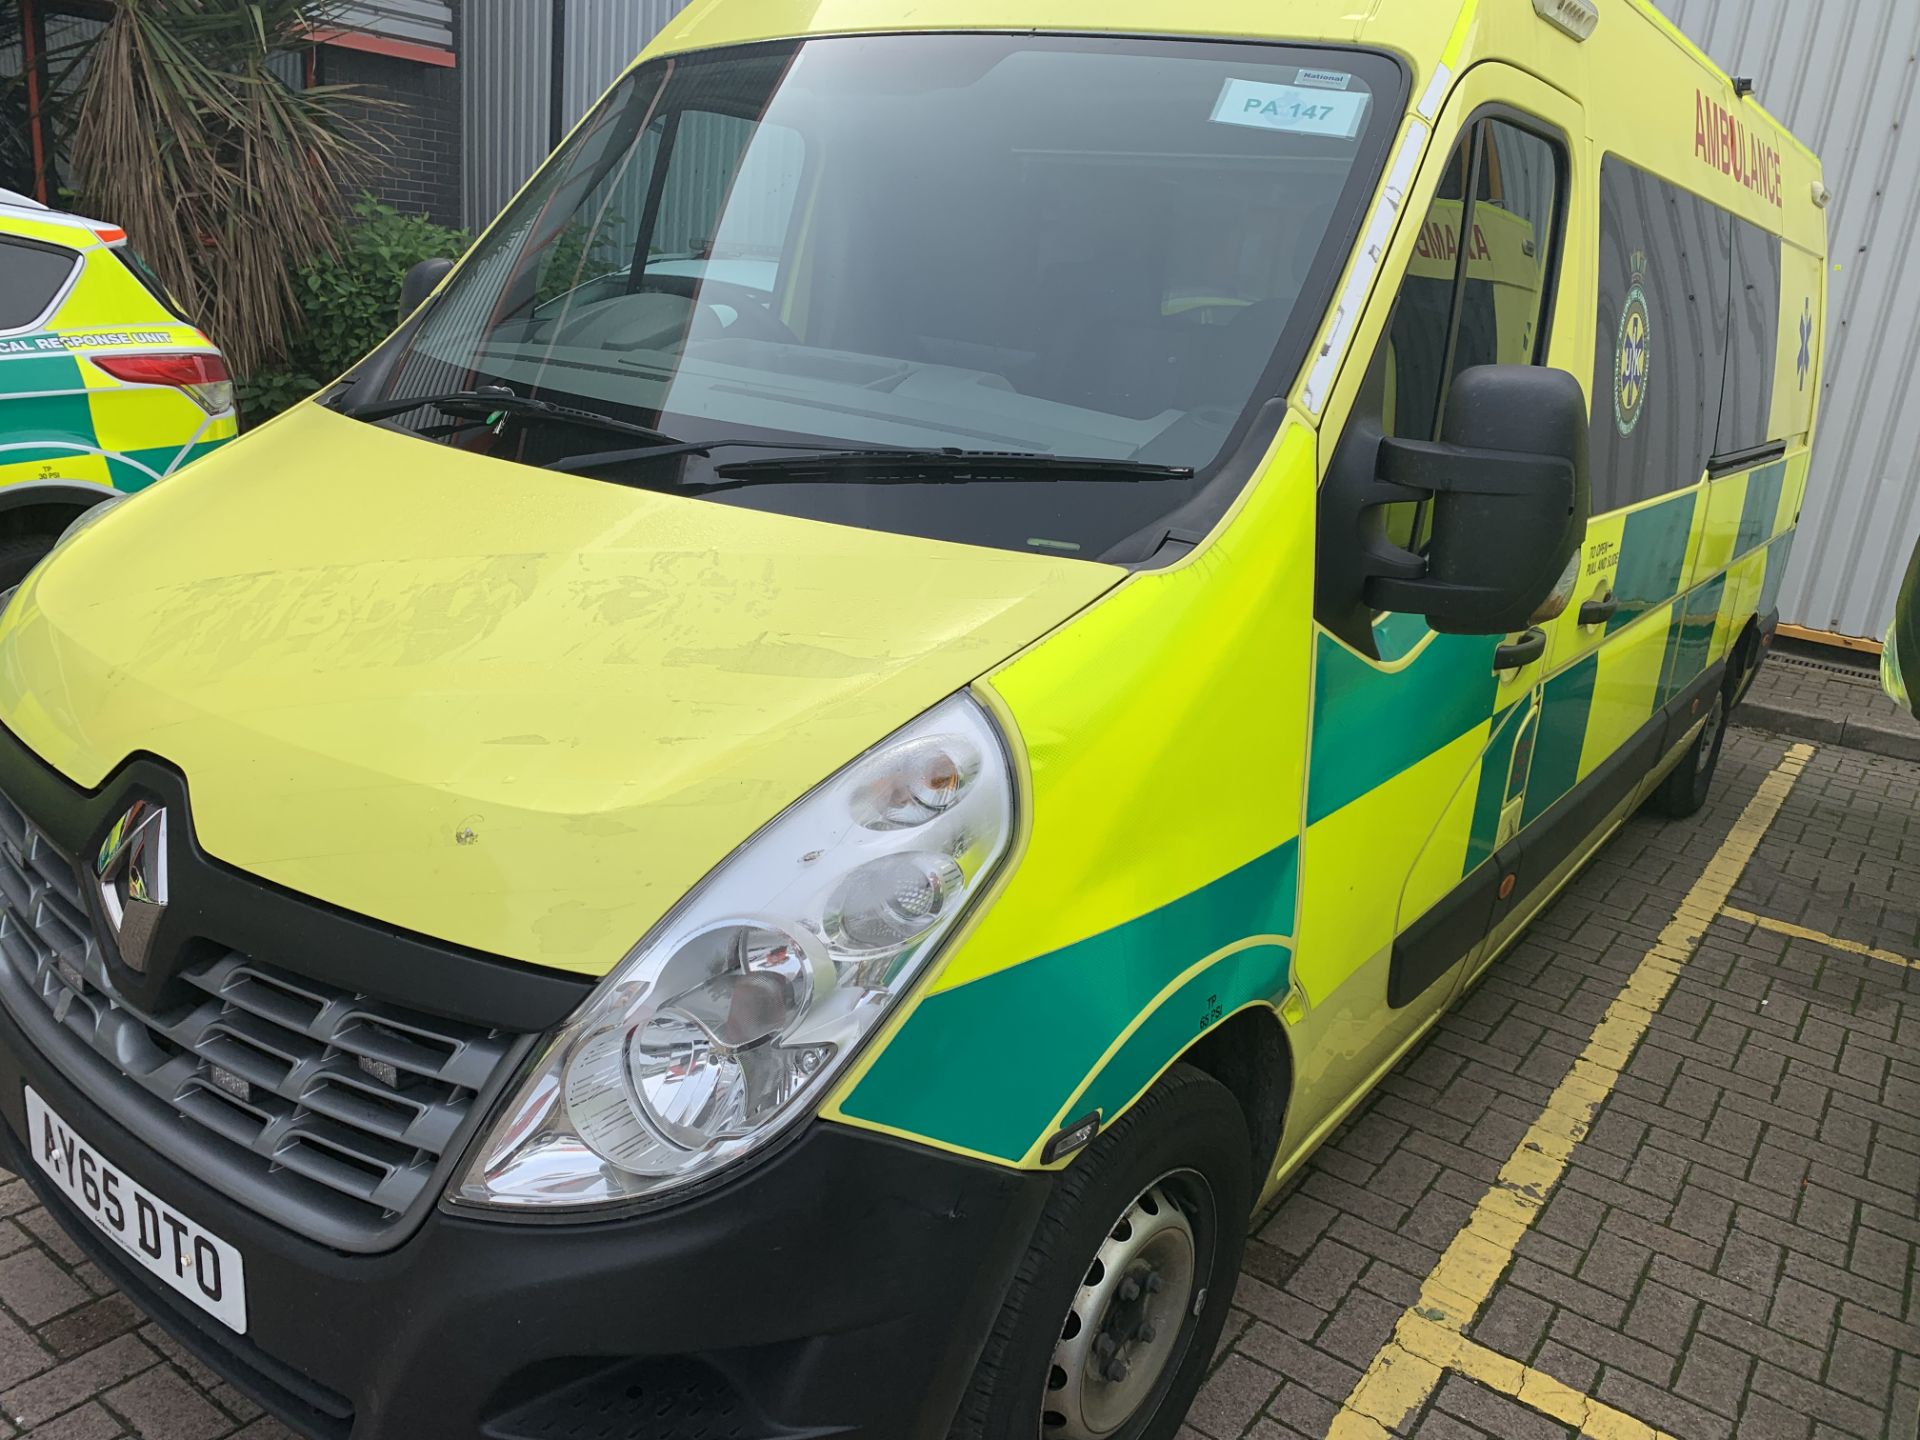 Renault Master LM35 dci A&E frontline ambulance, registration No. AY65 DTO, Cen compliant, BAUS - Image 2 of 12